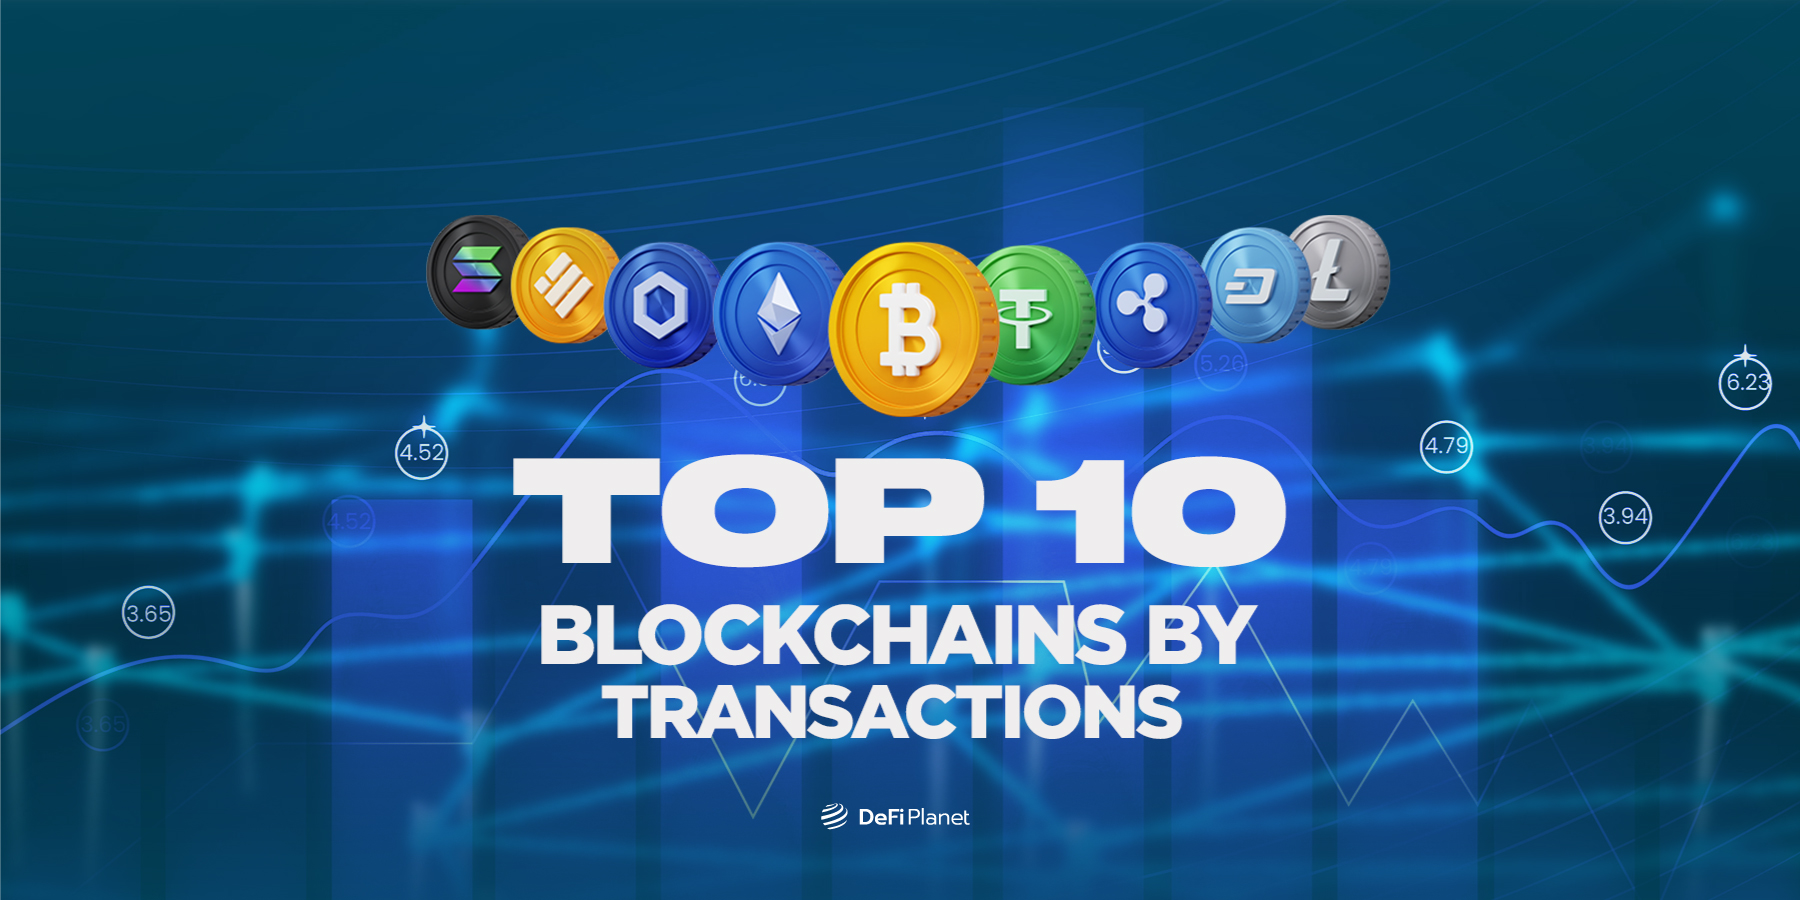 Exploring the Top 10 Blockchains by On-Chain Transaction Volume